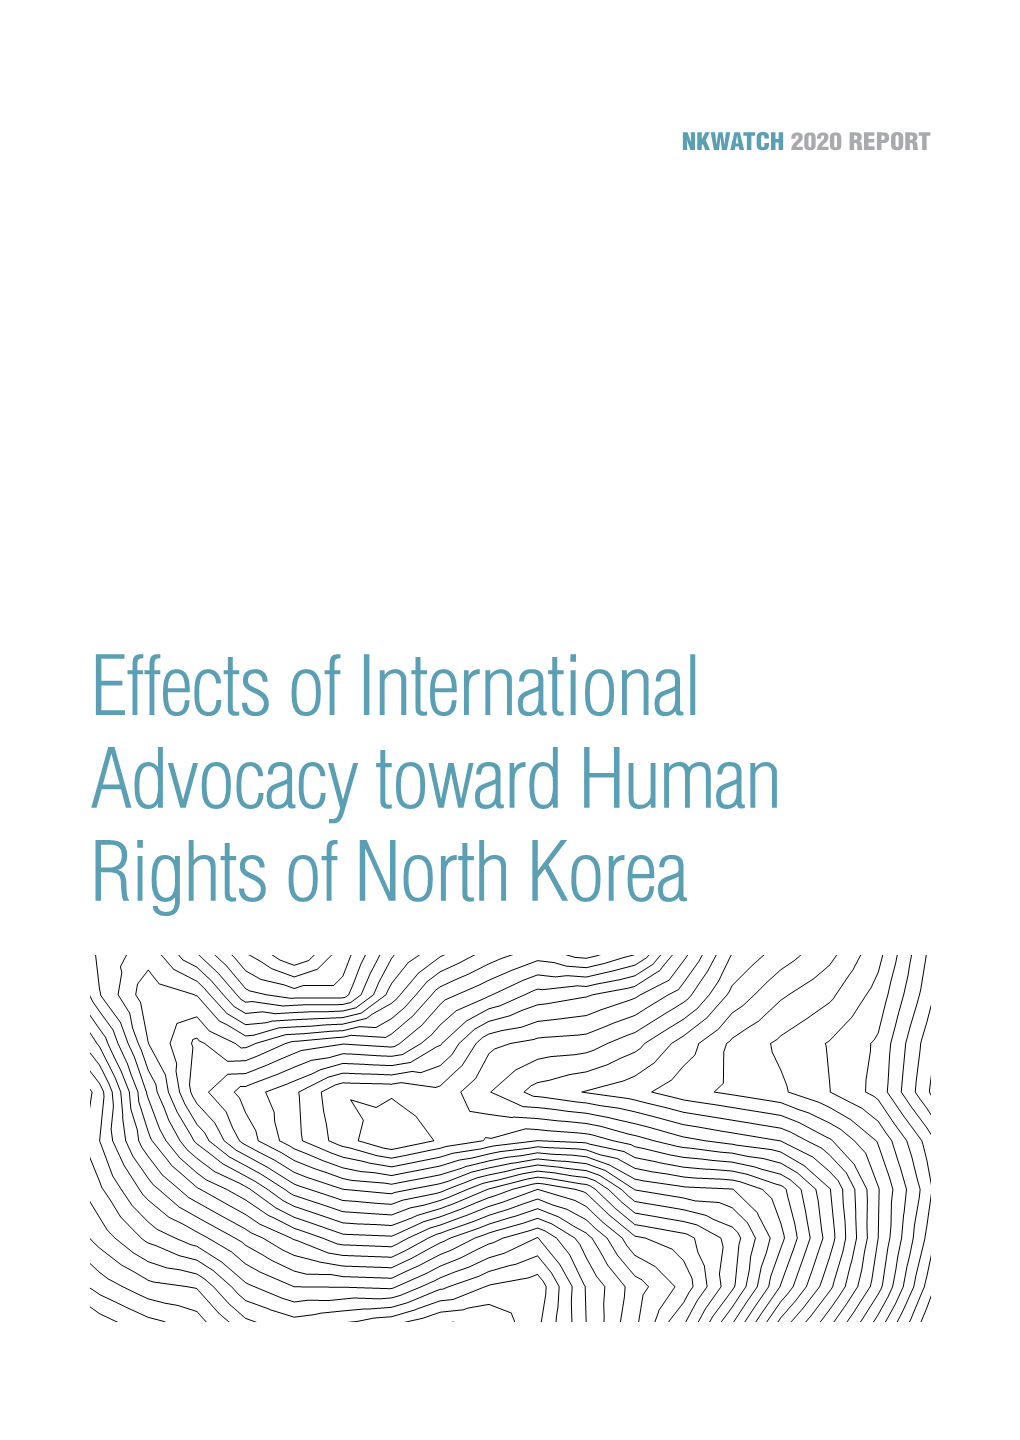 Effects of International Advocacy Toward Human Rights of North Korea